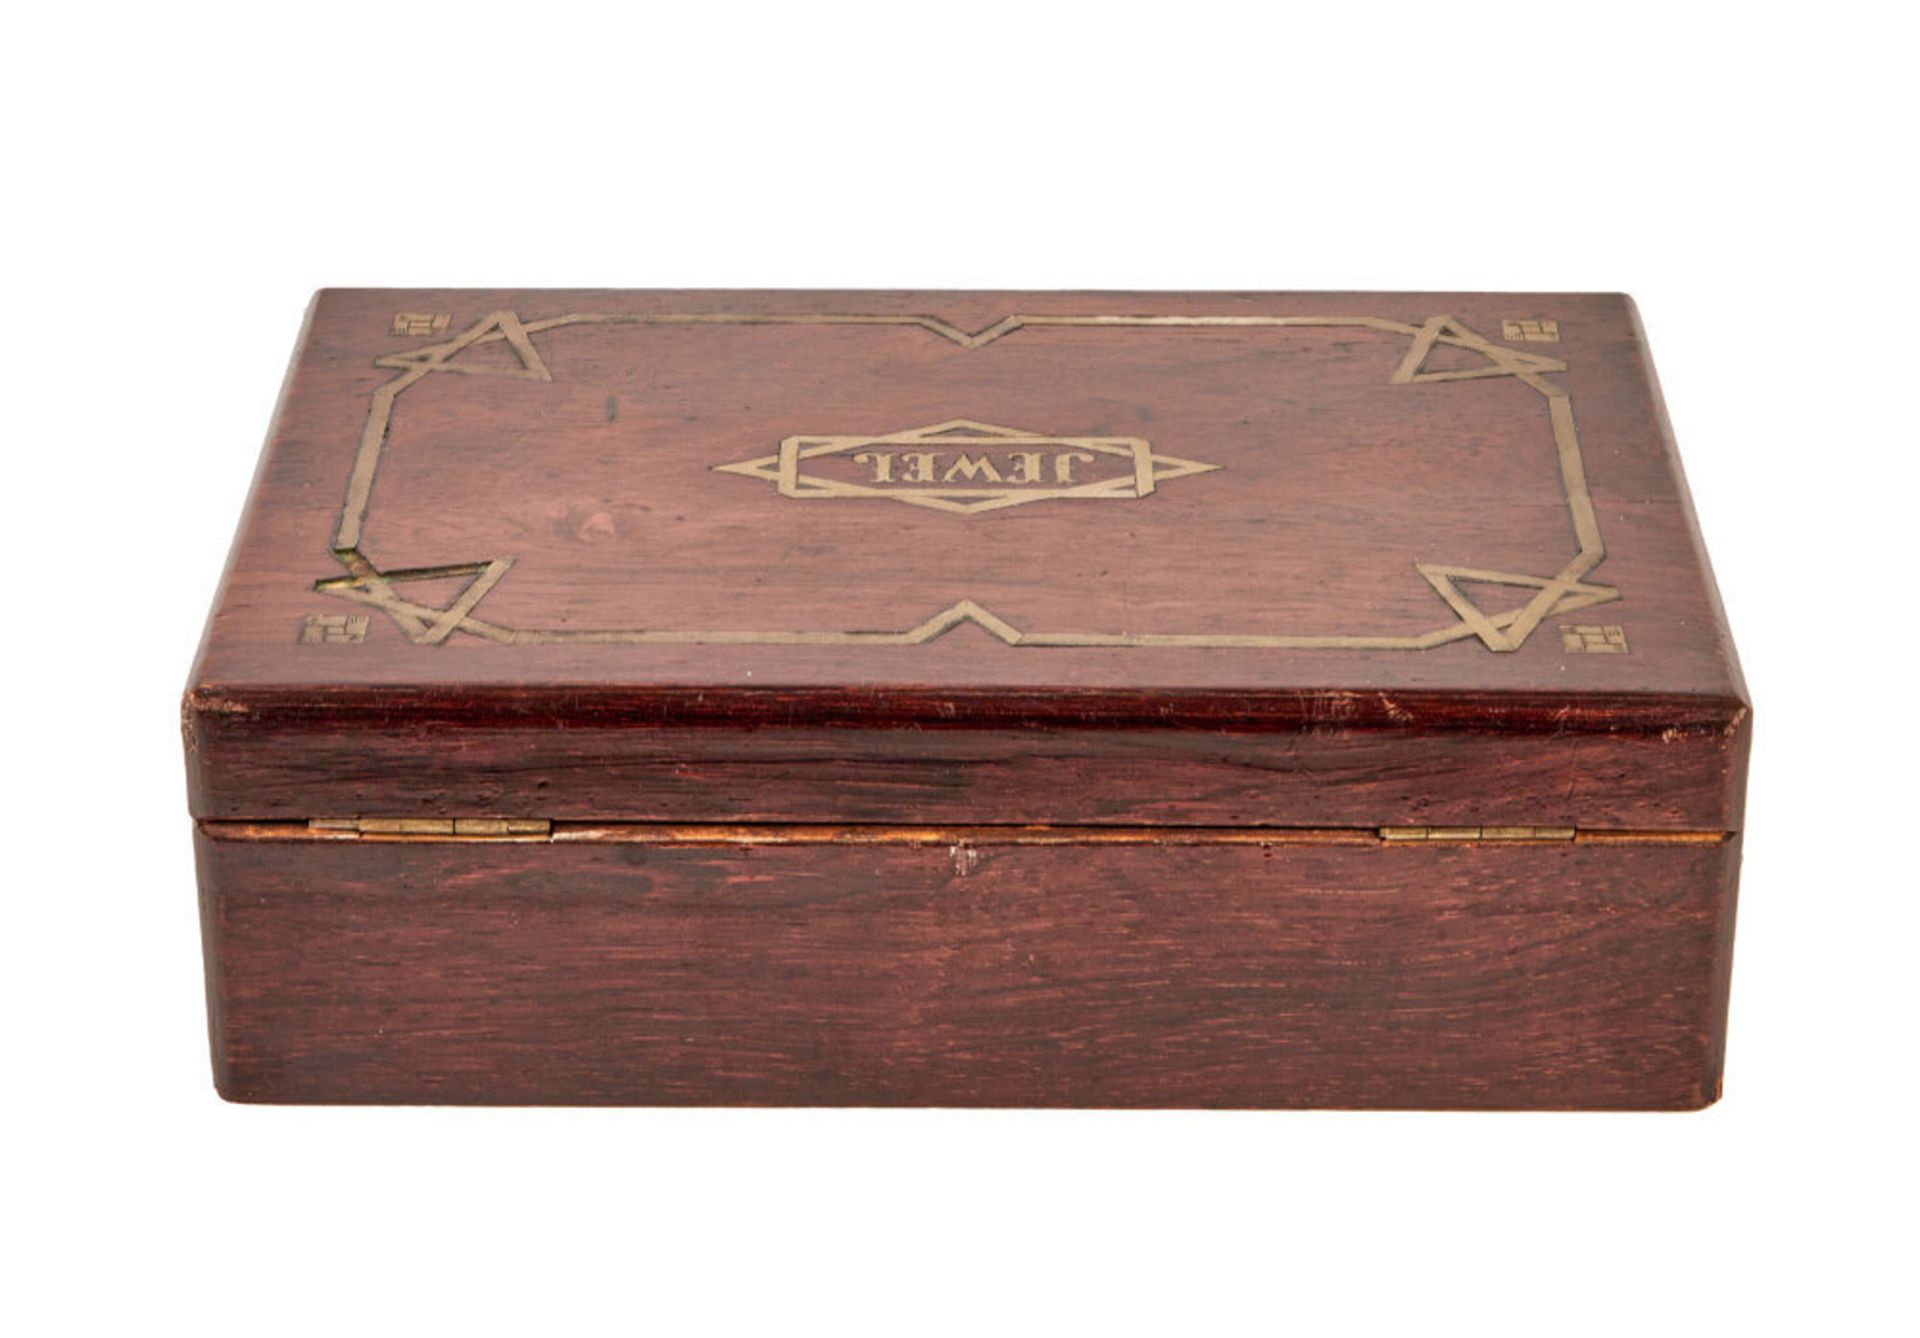 THE GOONIES | "ONE-EYED WILLY" WOODEN JEWEL CHEST - Image 4 of 6